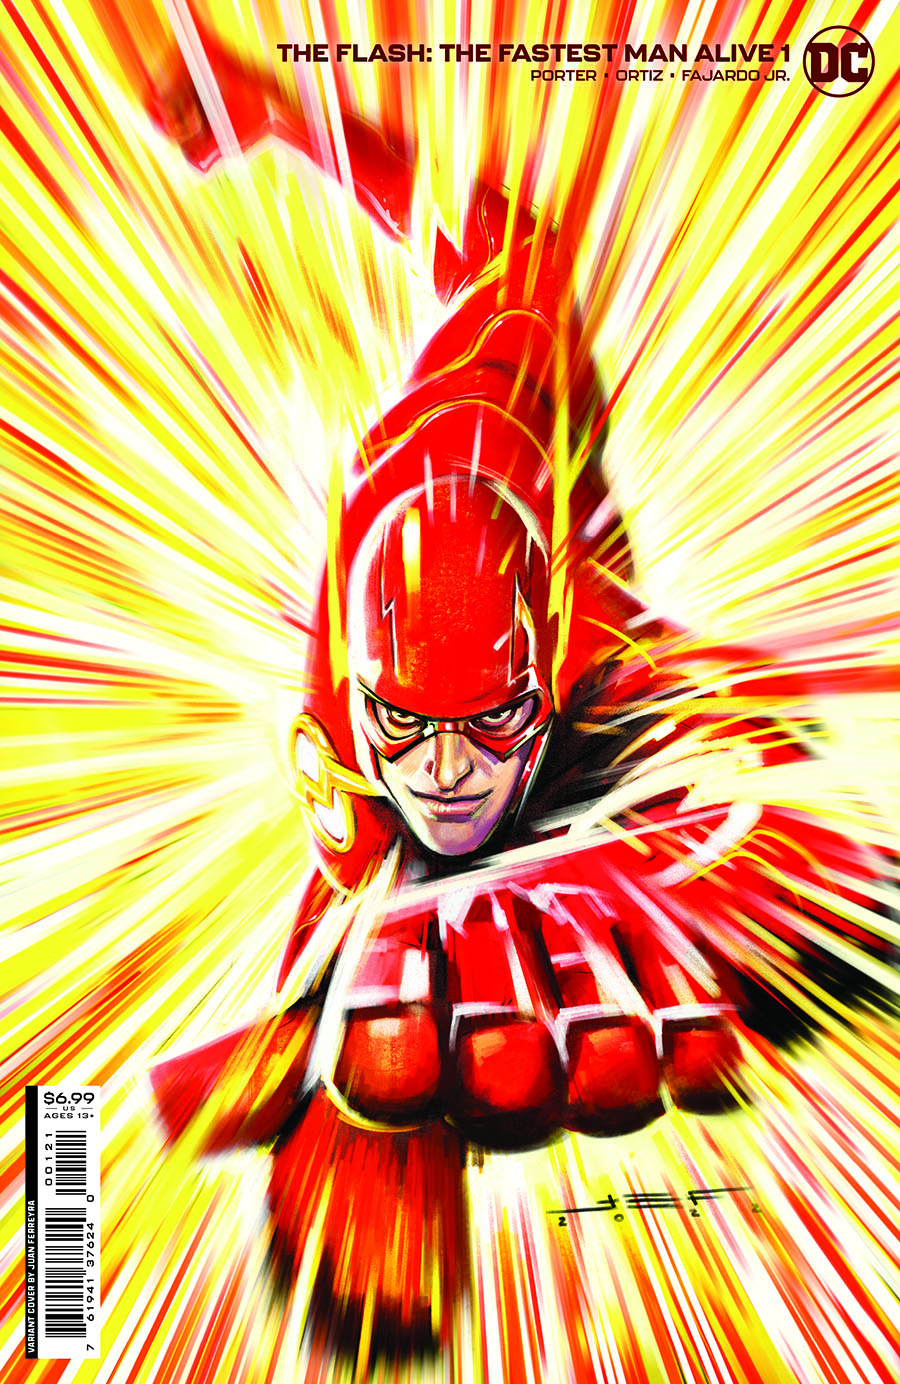 Flash The Fastest Man Alive Vol 2 #1 Cover B Variant Juan Ferreyra Card Stock Cover